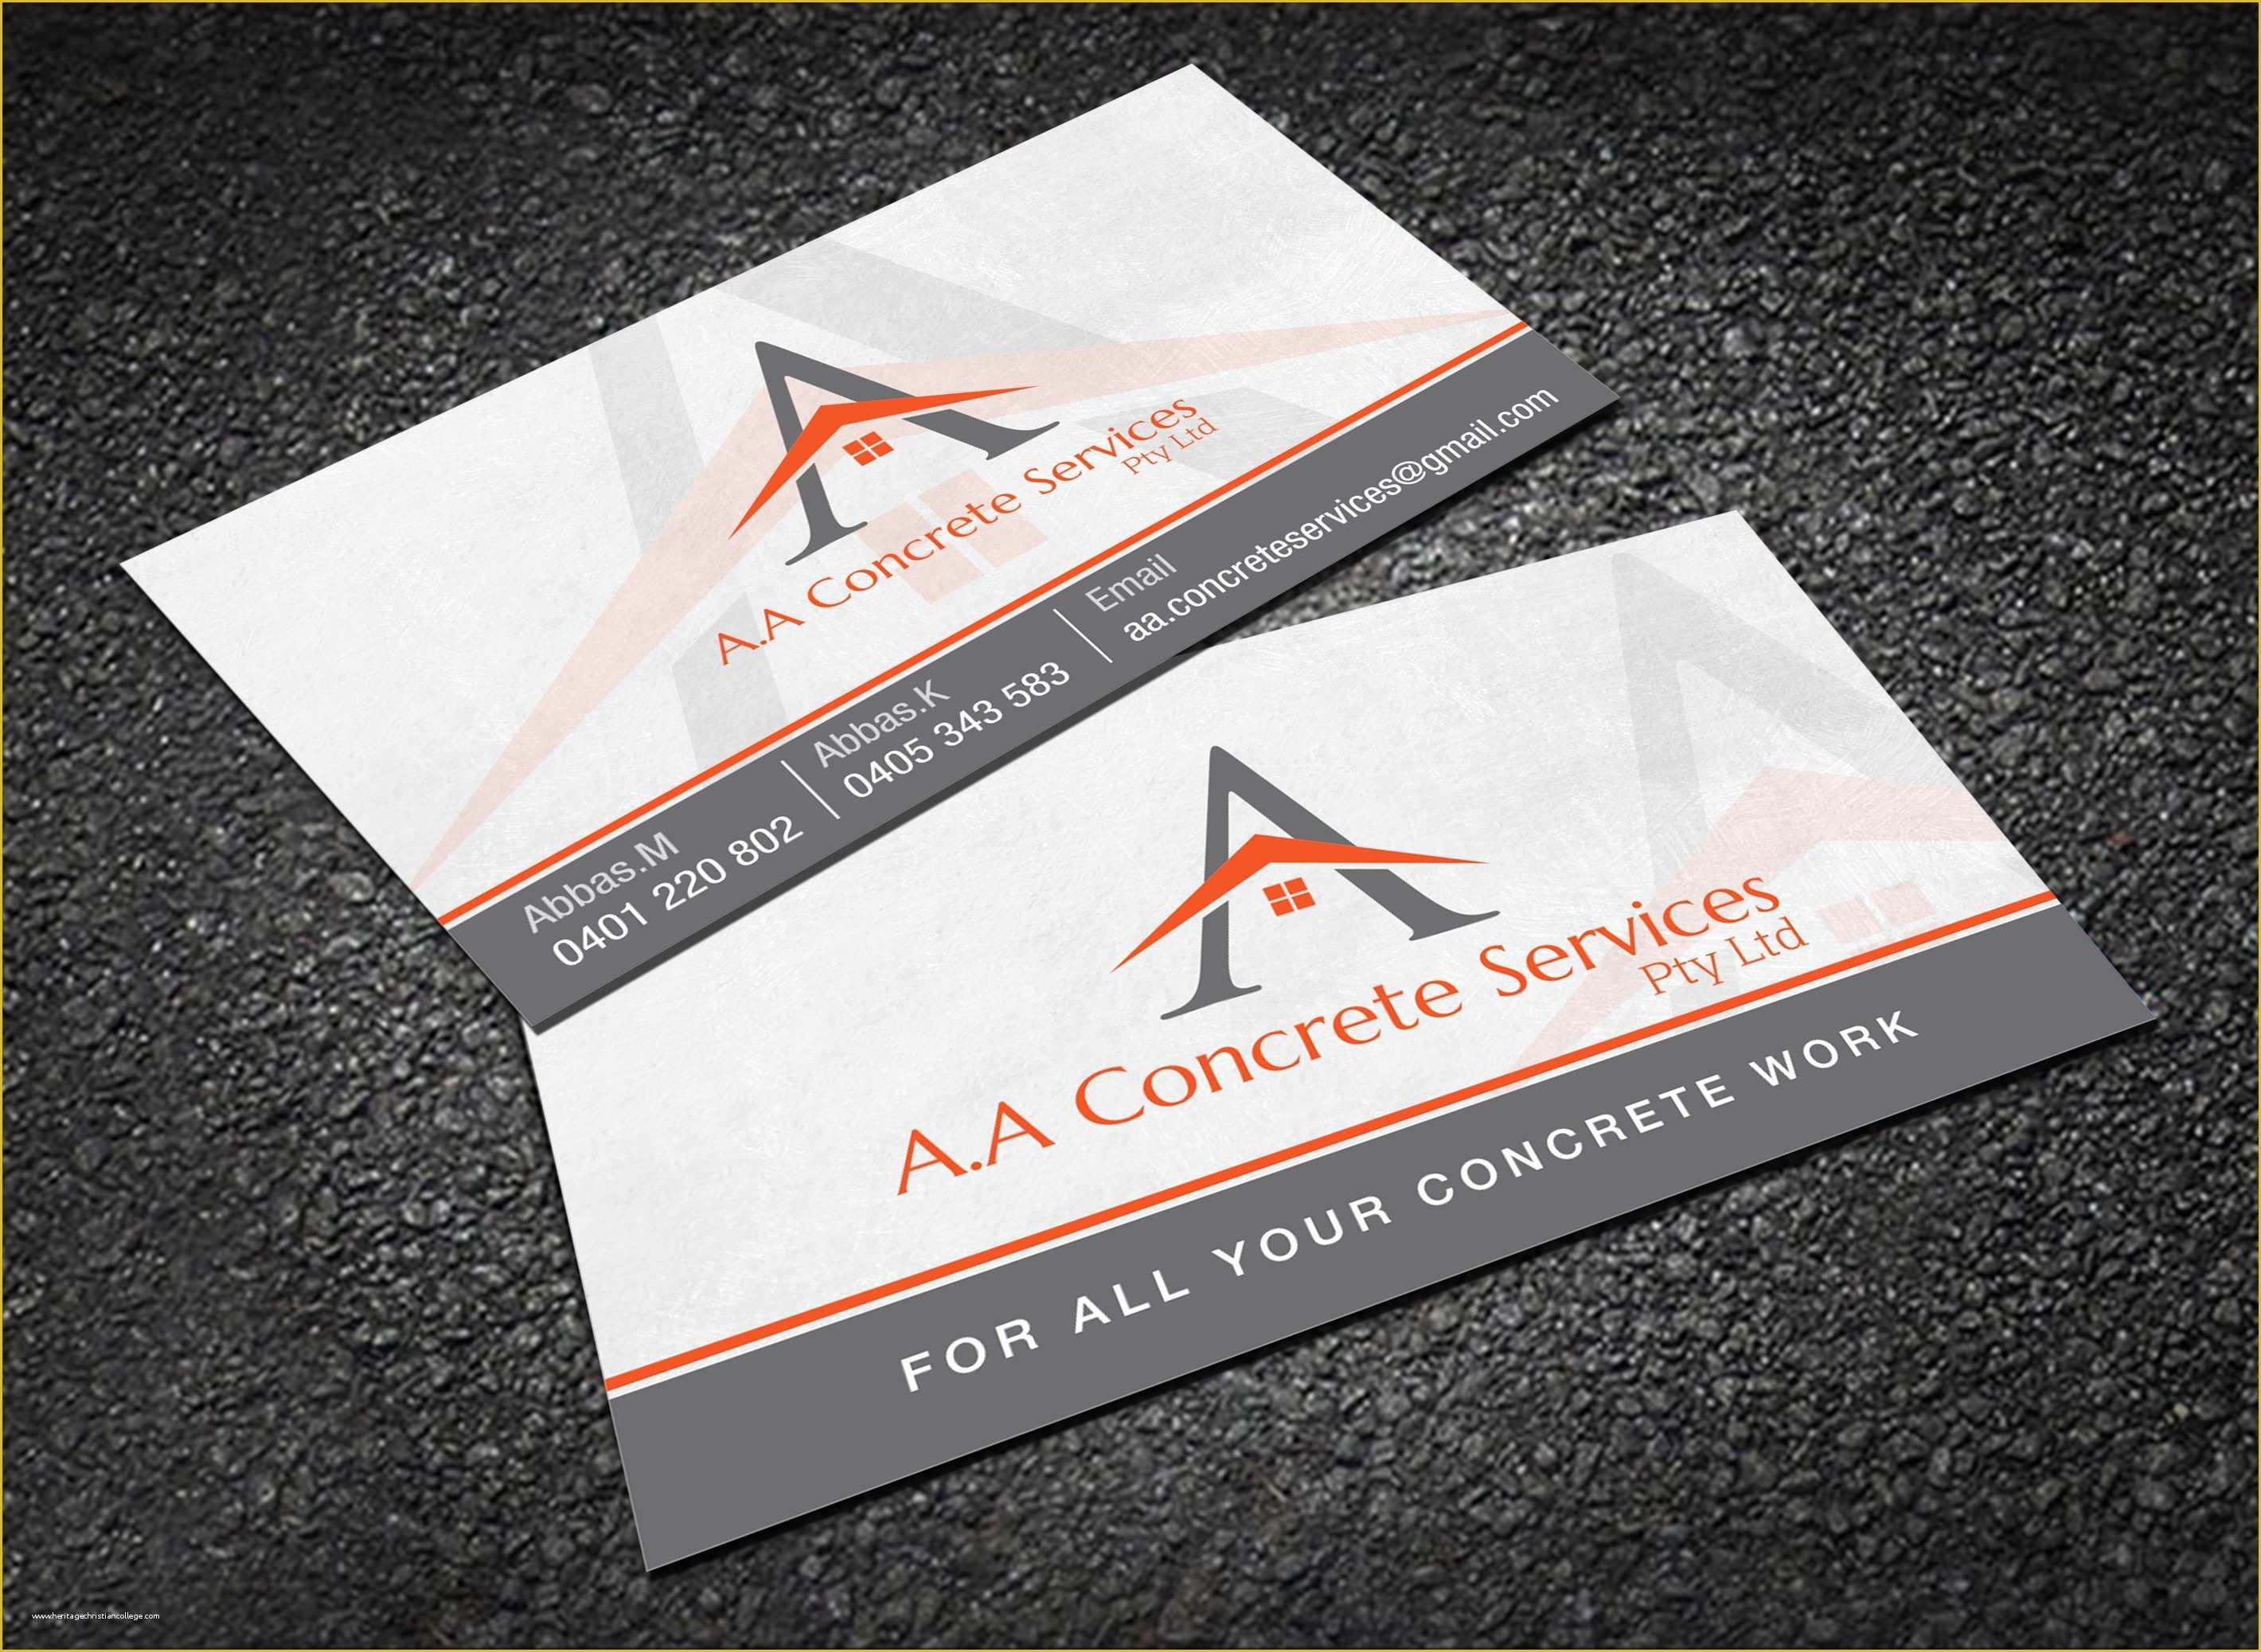 Adobe Business Card Template Free Of Business Cards Free Downloads New Card Template Illustr On